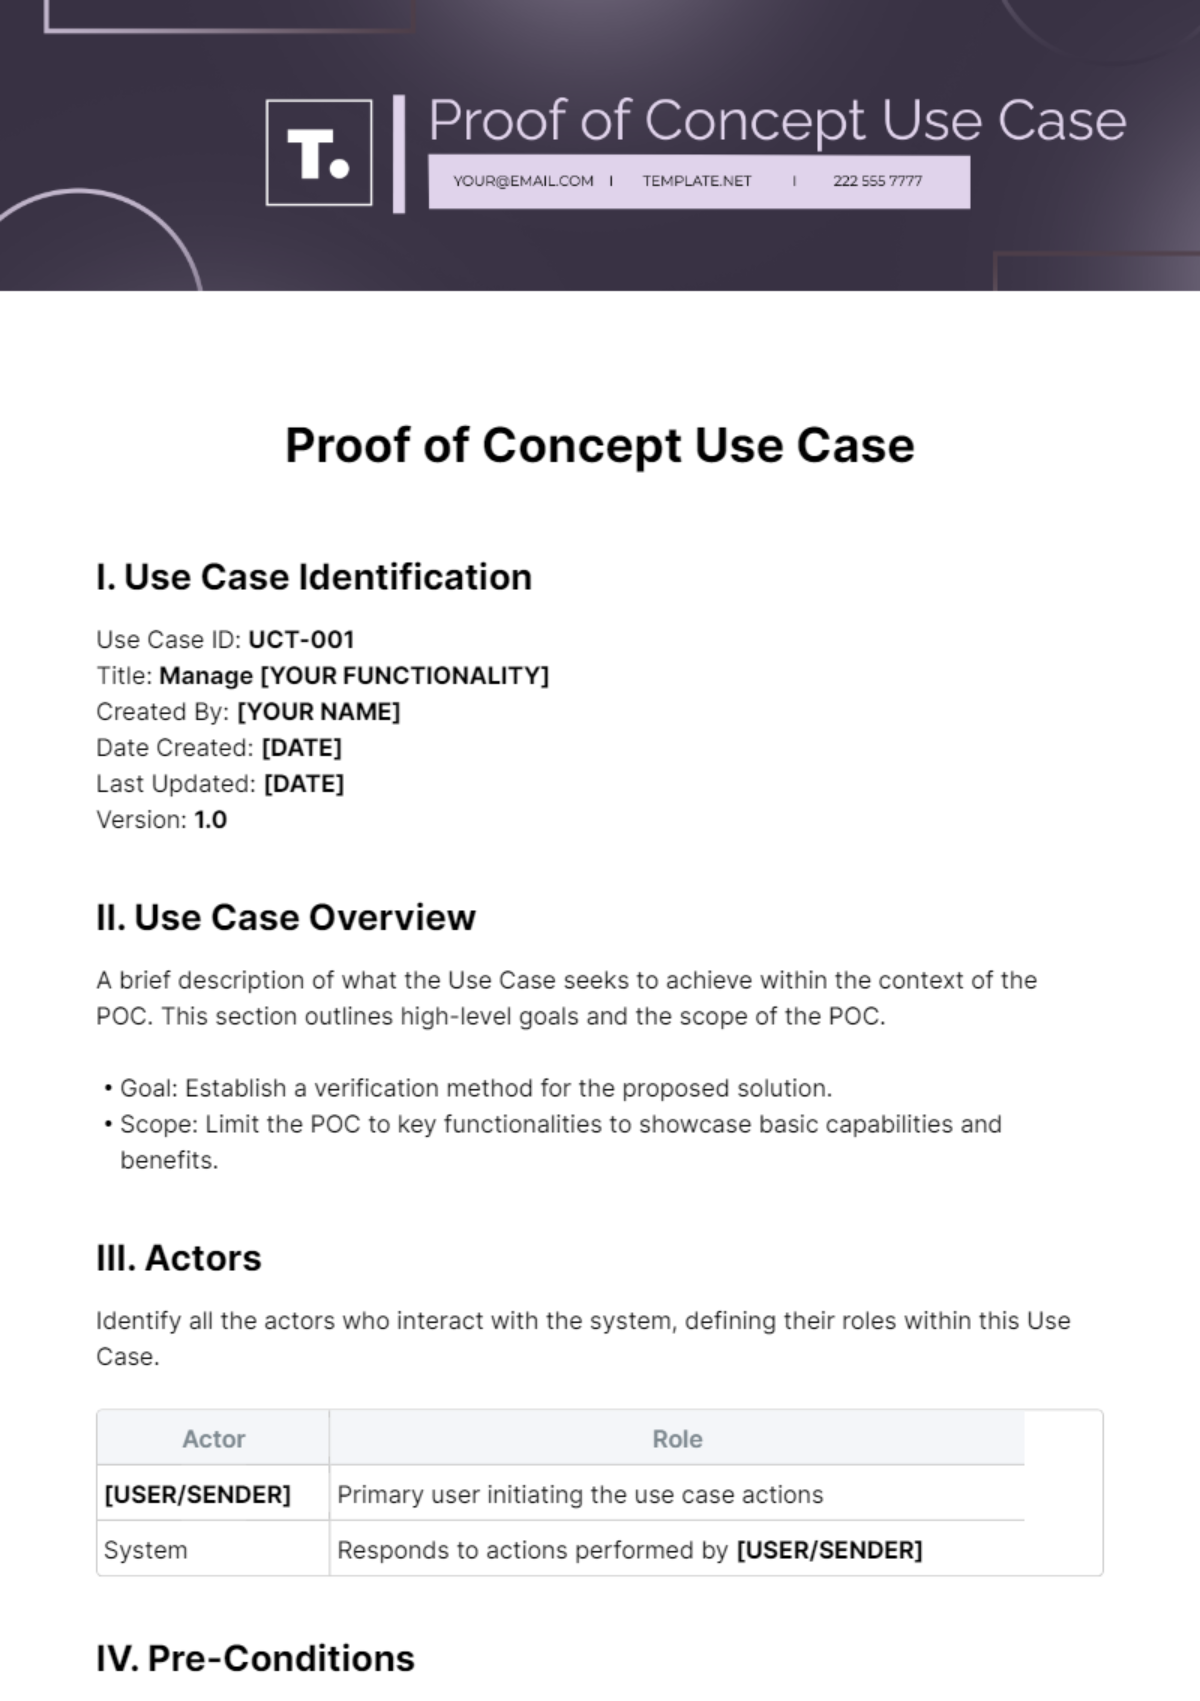 Proof of Concept Use Case Template